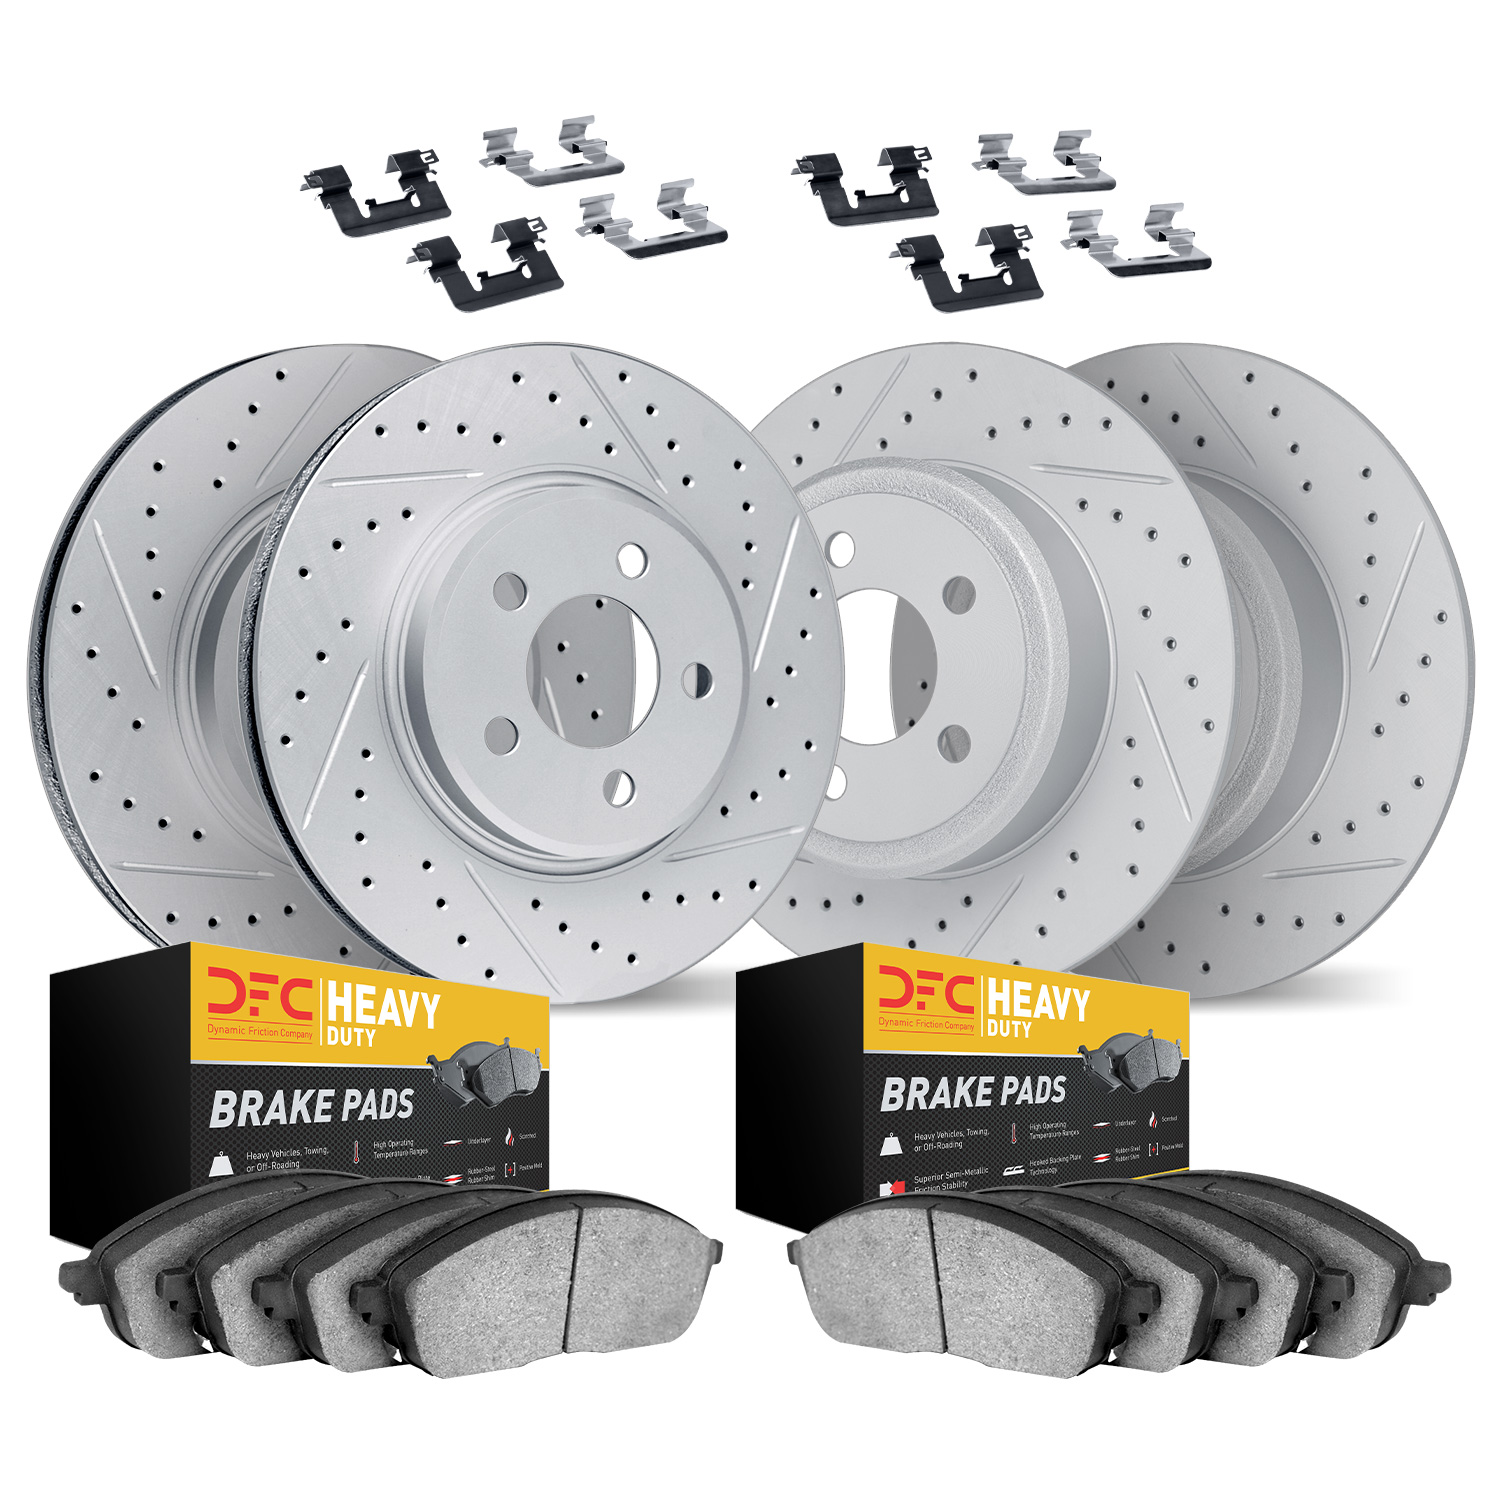 2214-99107 Geoperformance Drilled/Slotted Rotors w/Heavy-Duty Pads Kit & Hardware, 2015-2019 Ford/Lincoln/Mercury/Mazda, Positio